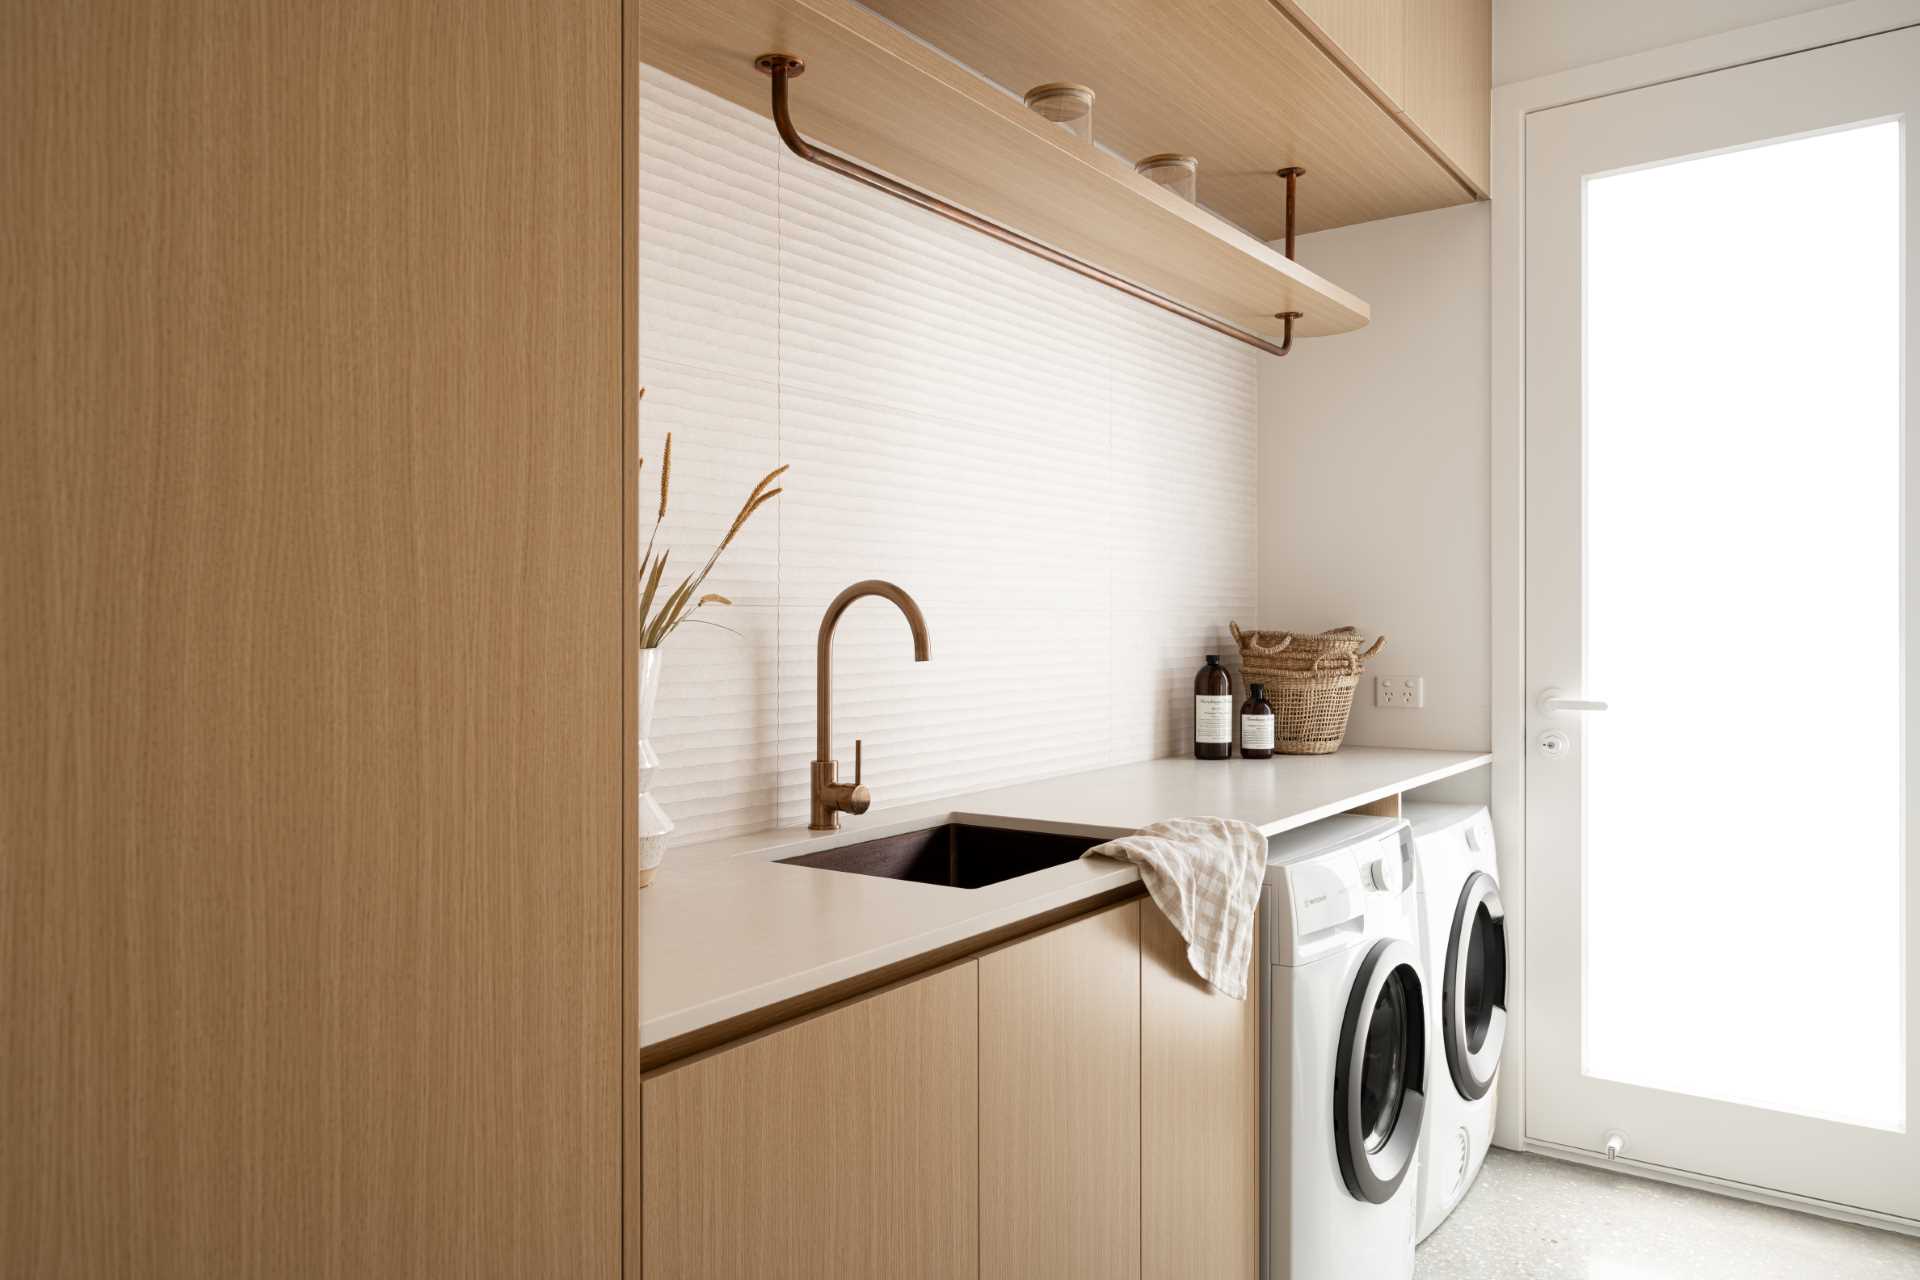 In this contemporary laundry, the countertop travels across the washer and dryer, making the most of the space, while the wall adds a textural element.